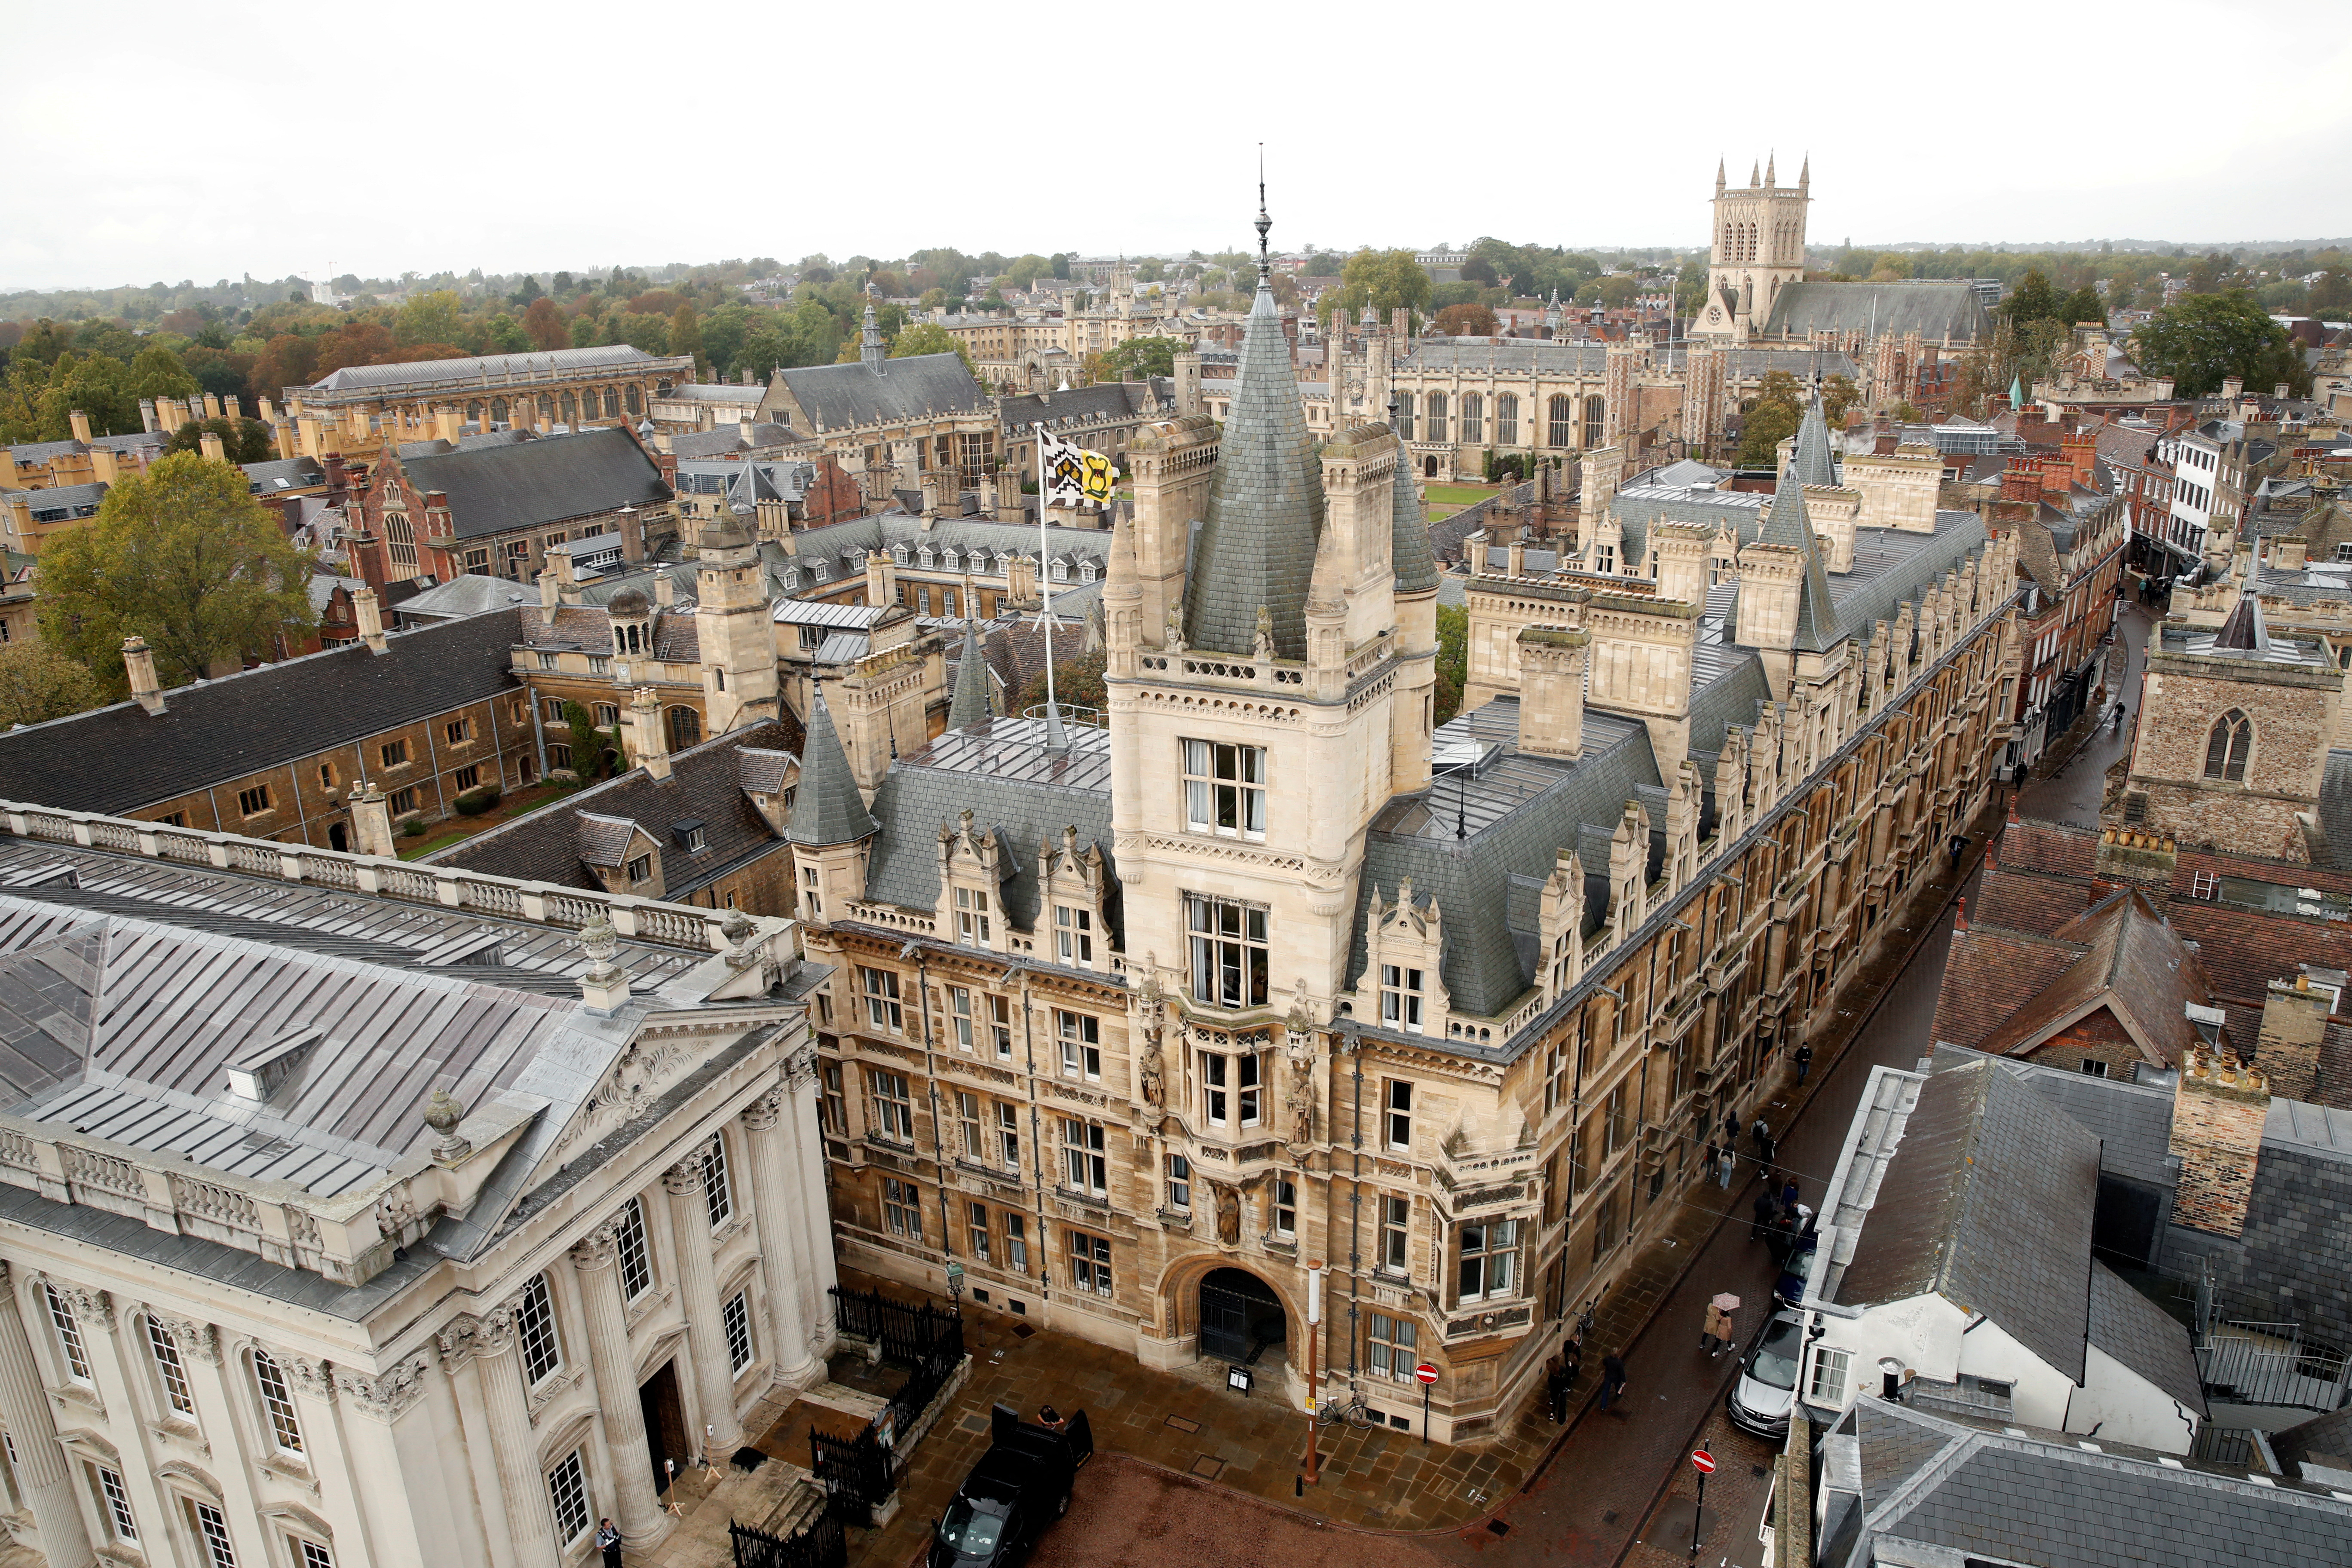 University of Cambridge Admits It Gained from Slave Trade and Promises to Expand scholarships for Black students